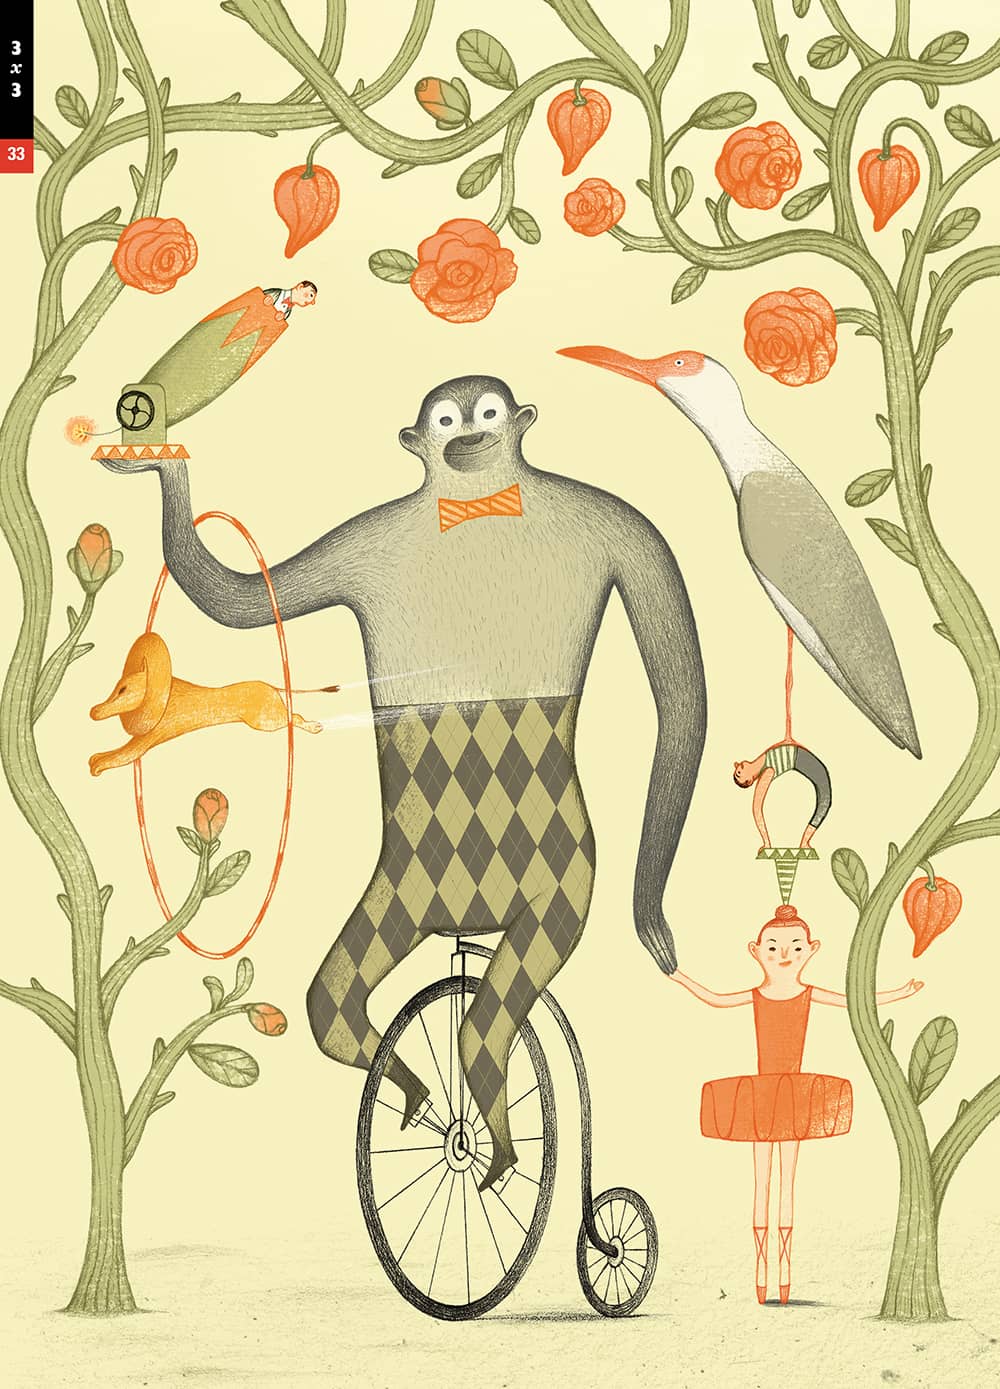 3x3 Issue A whimsical painting of a dapper monkey riding an old-fashioned bike with other circus folk and animals, surrounded by flowering vines.; Cover image by Marie Lafrance